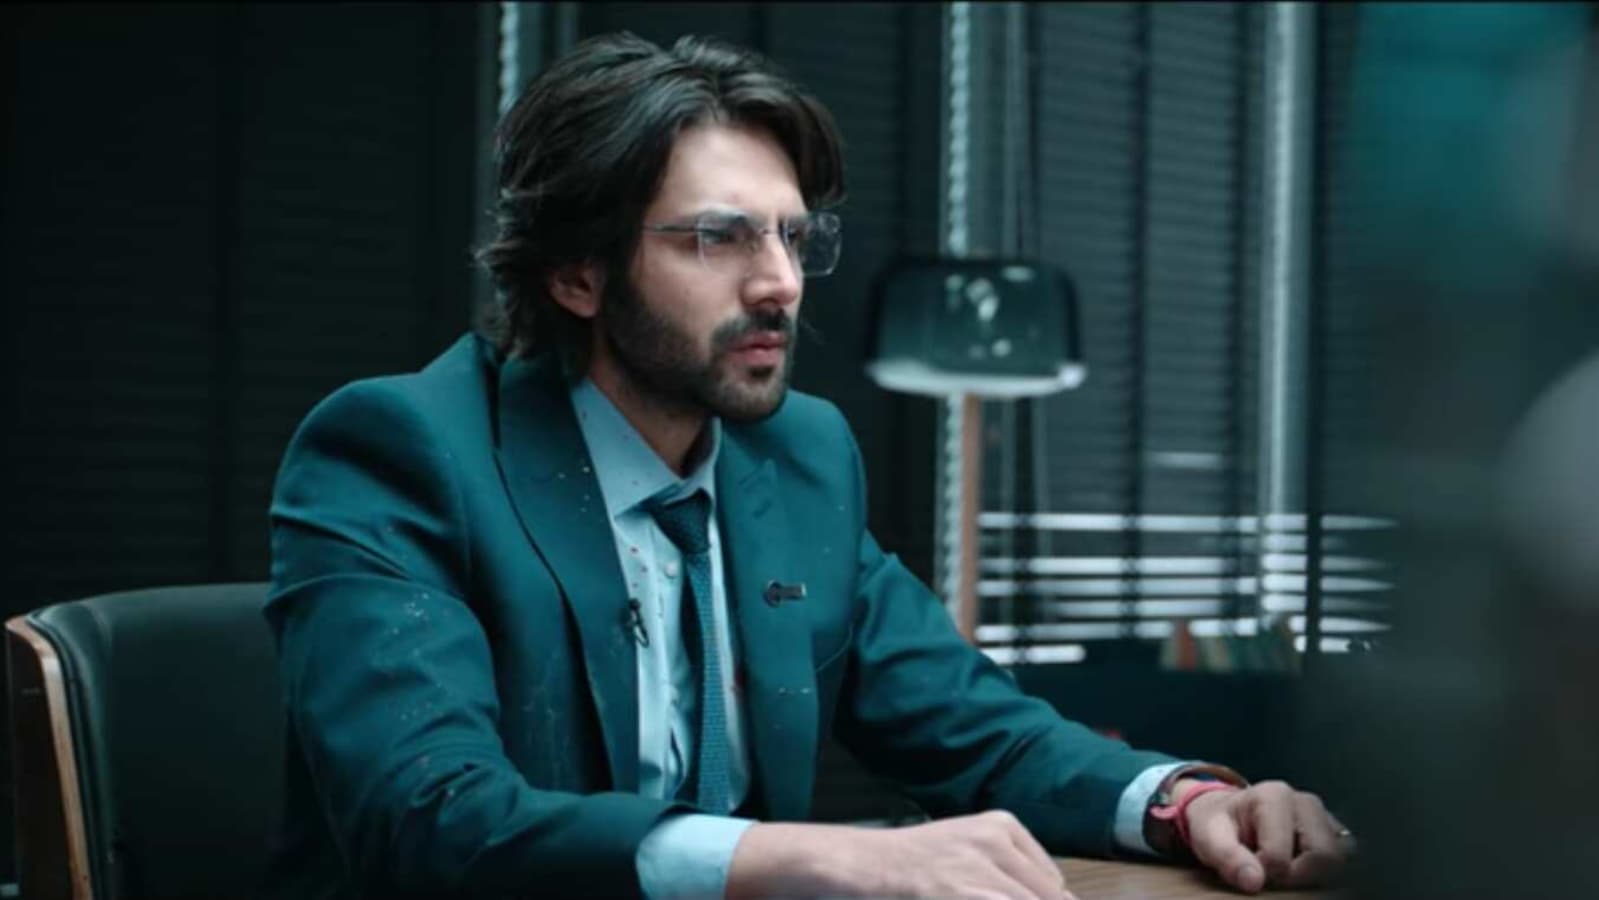 Dhamaka teaser: Kartik Aaryan is a nervous news anchor reporting on terror attack. Watch | Bollywood - Hindustan Times